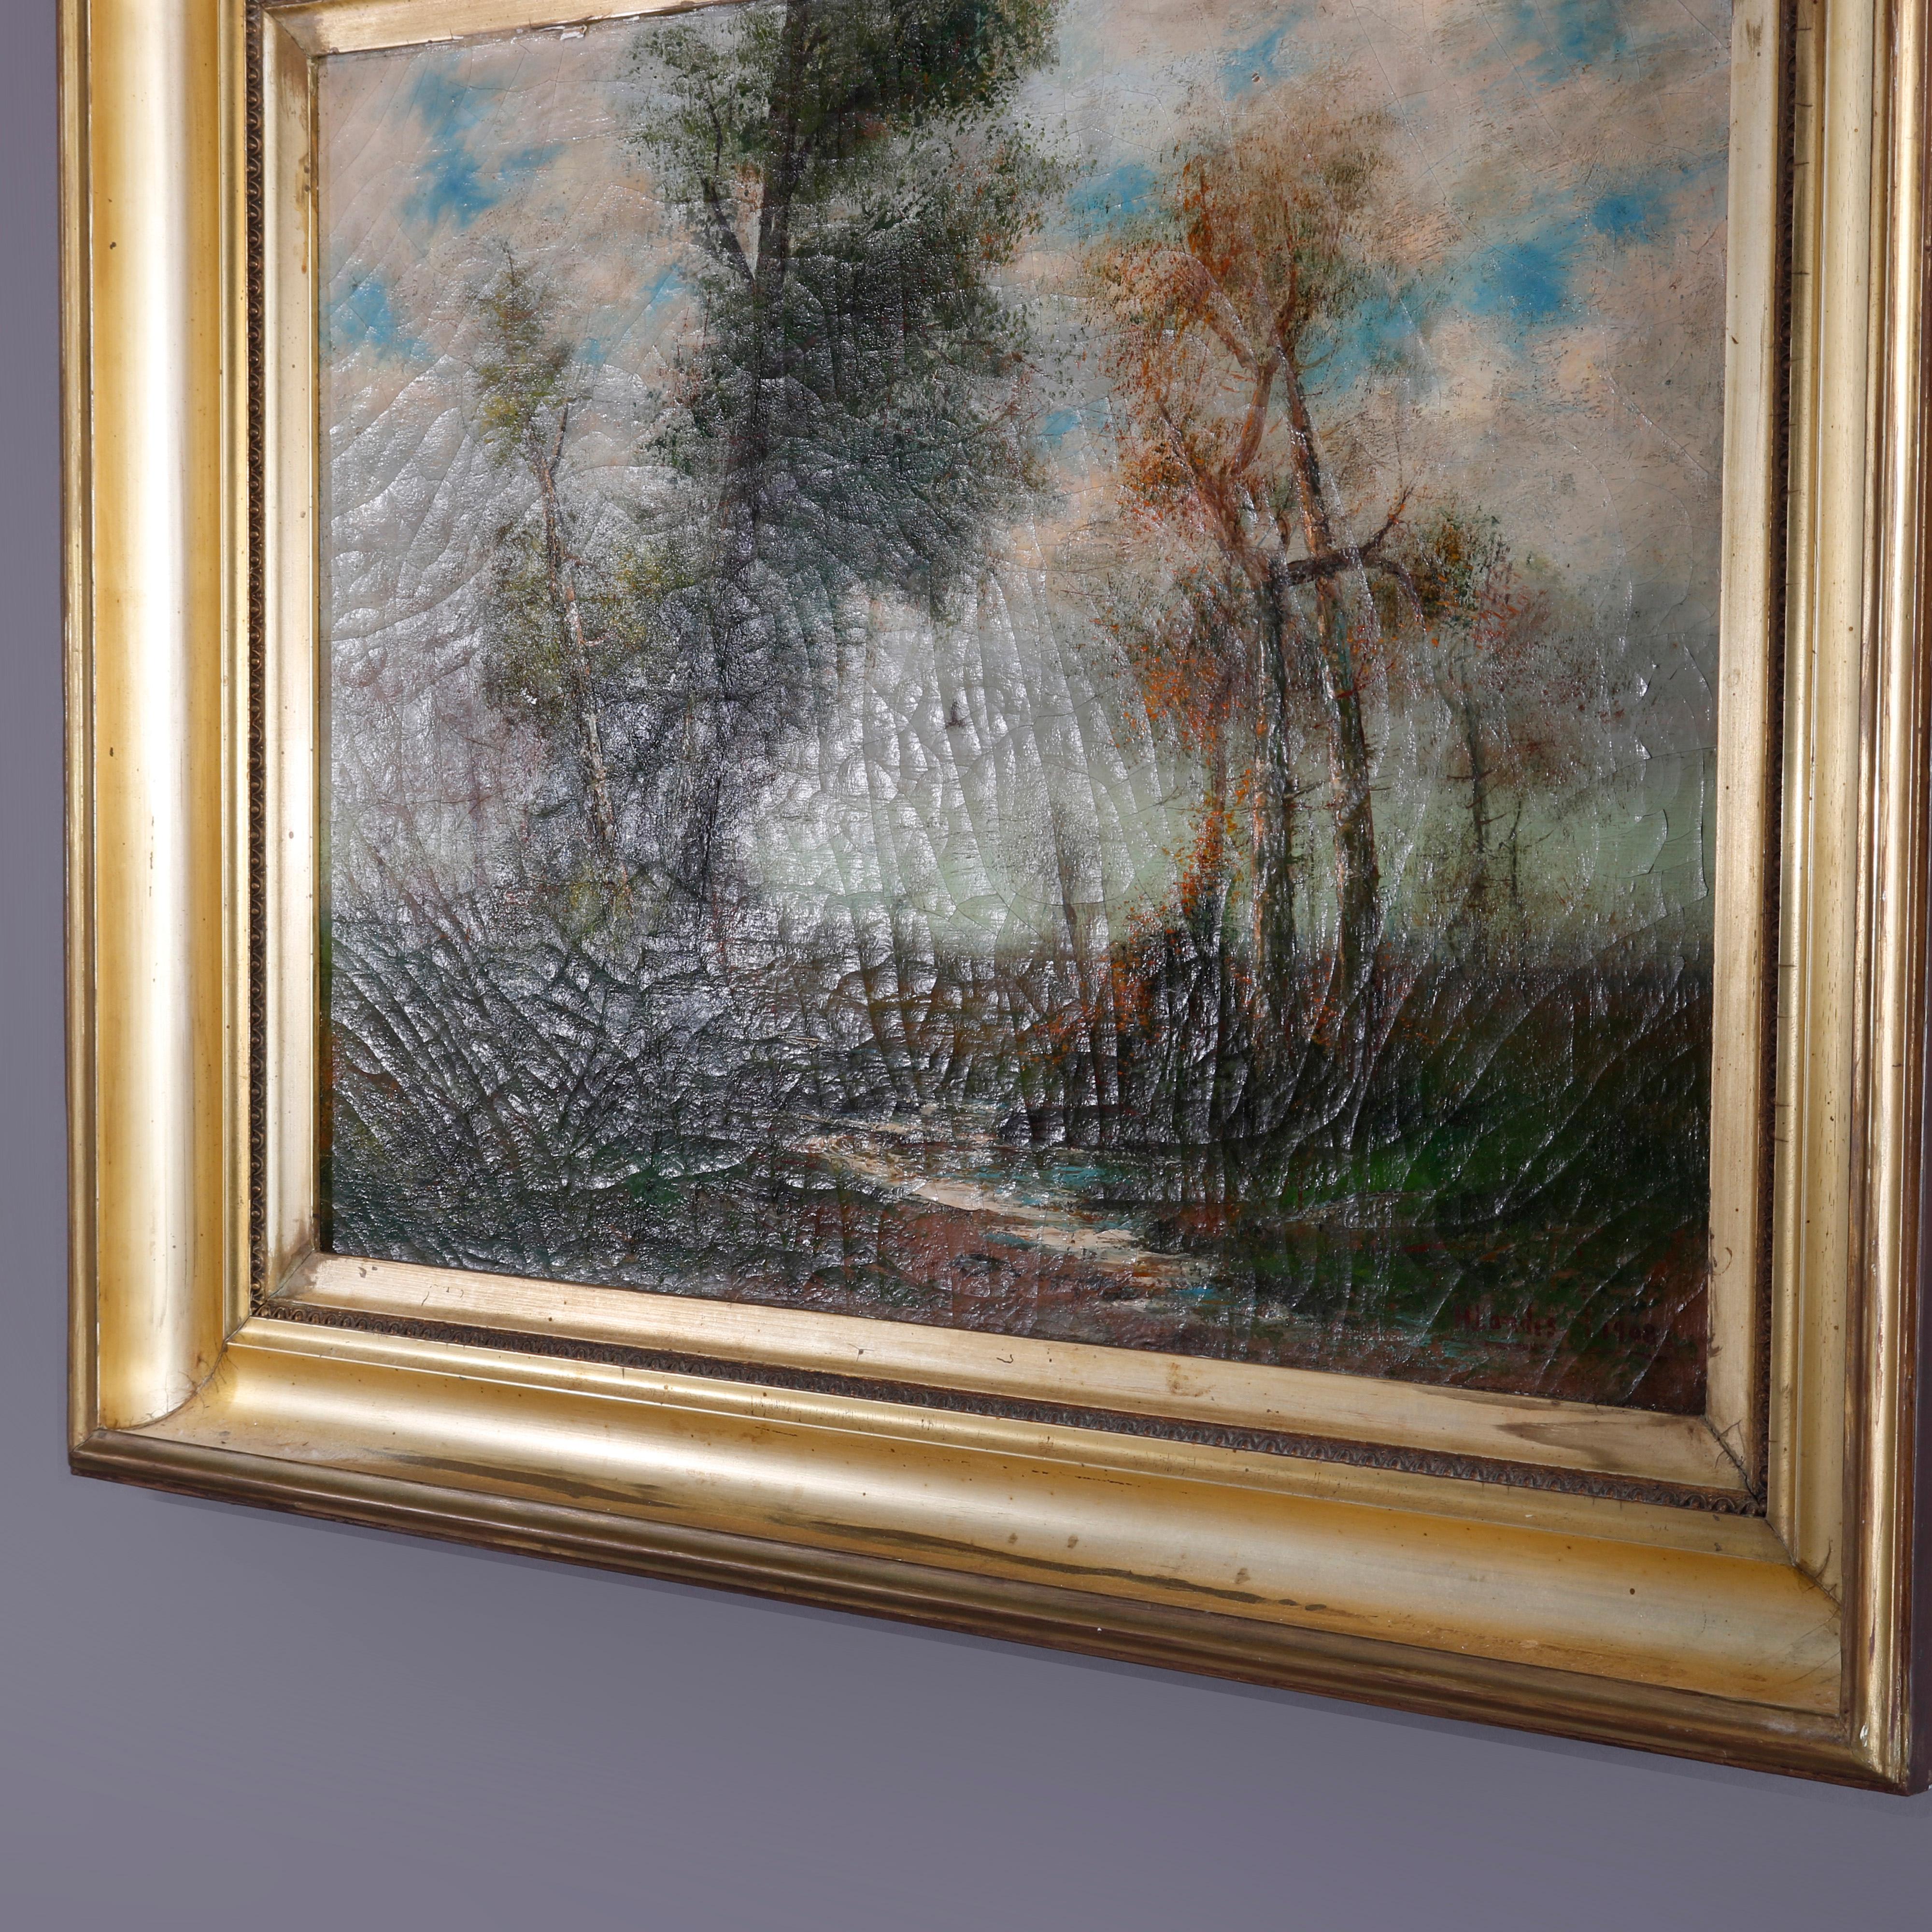 Hand-Painted Antique Impressionist Landscape Painting with Stream by Landis, Dated 1908